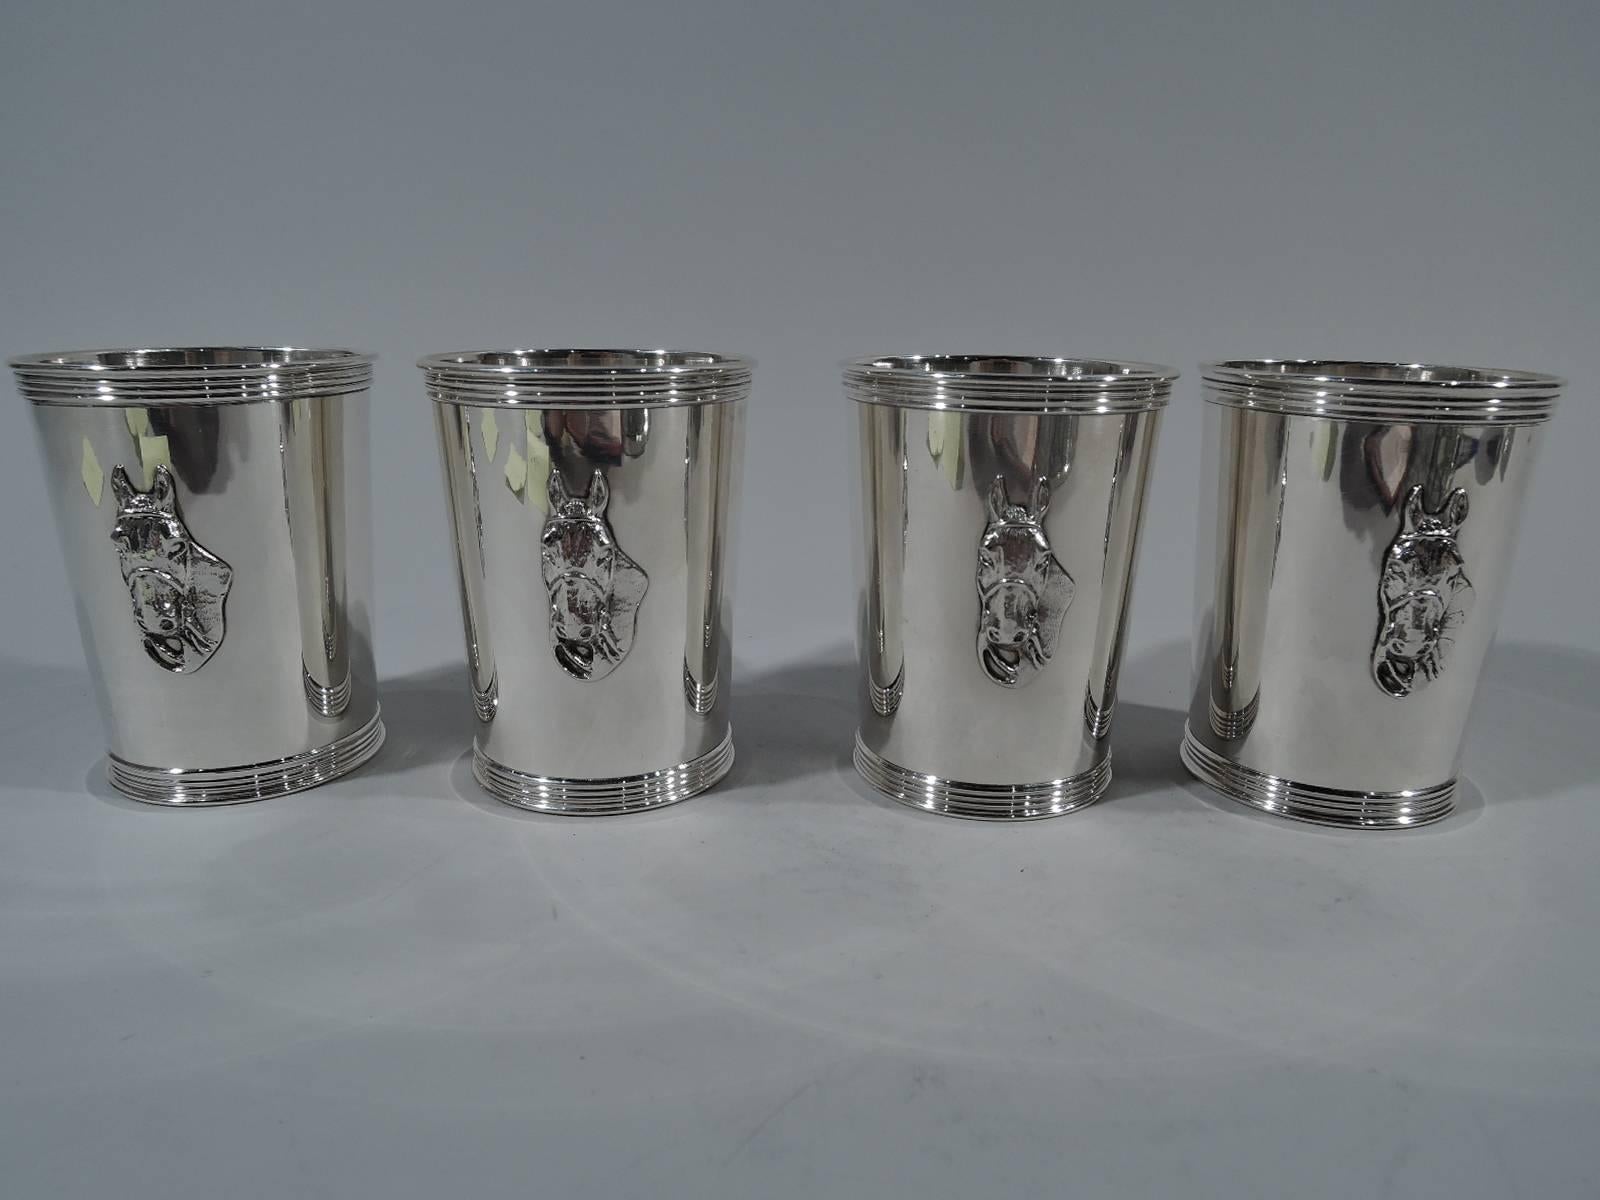 Set of four sterling silver mint julep cups. Retailed by Trees in Lexington, Kentucky. Each: straight and tapering sides, reeded rims, and applied horse head. A realistic equine portrait with erect ears, wide nostrils, and direct gaze. A great Derby